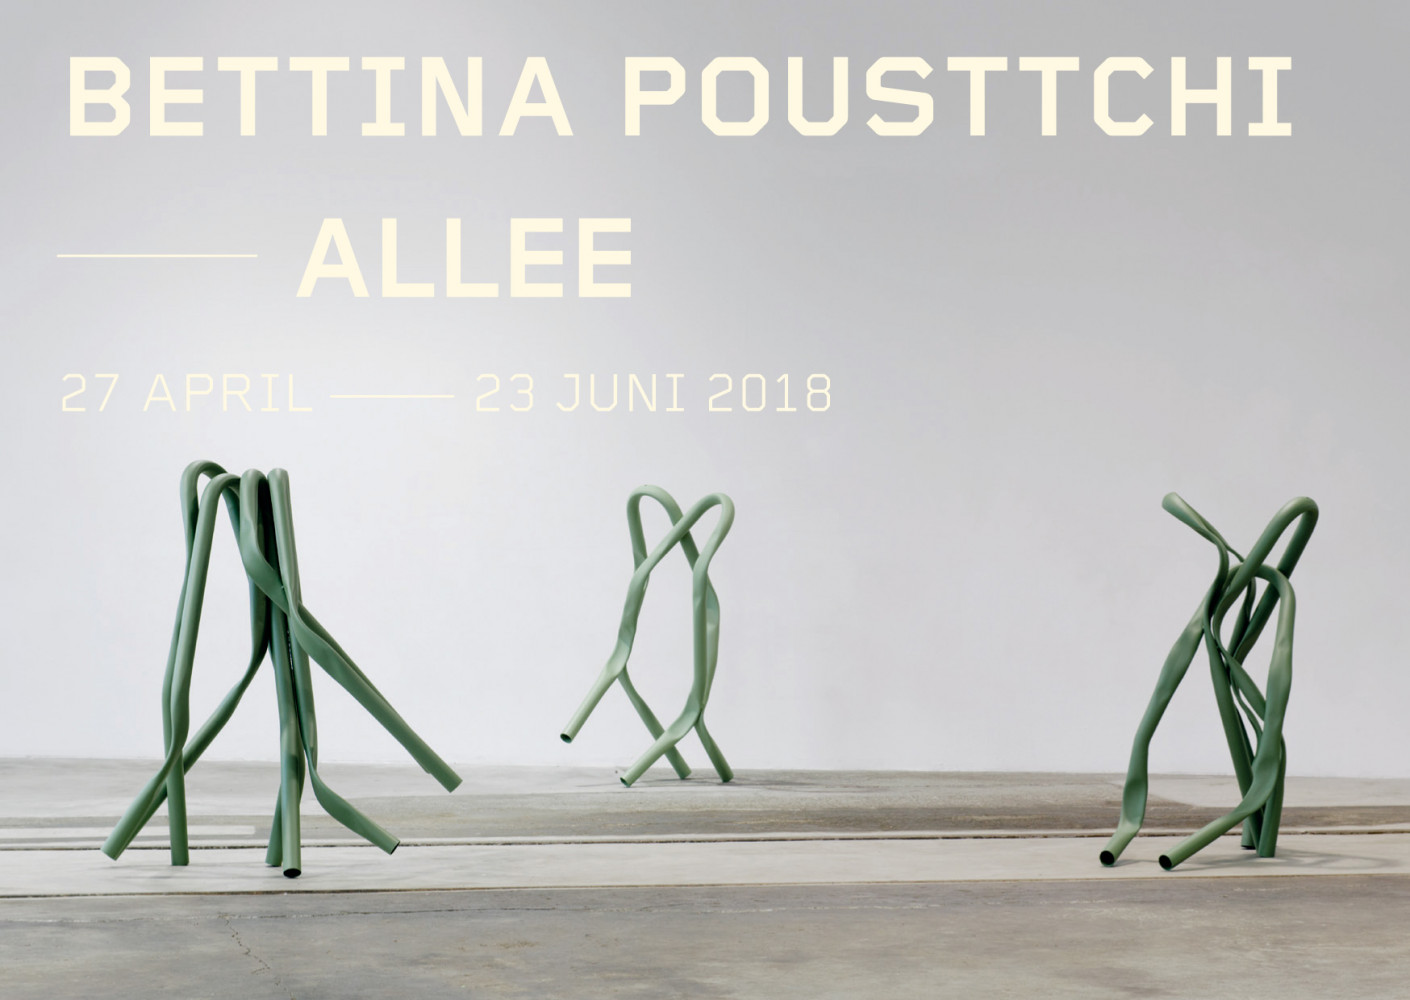 ‘Bettina Pousttchi – Allee’